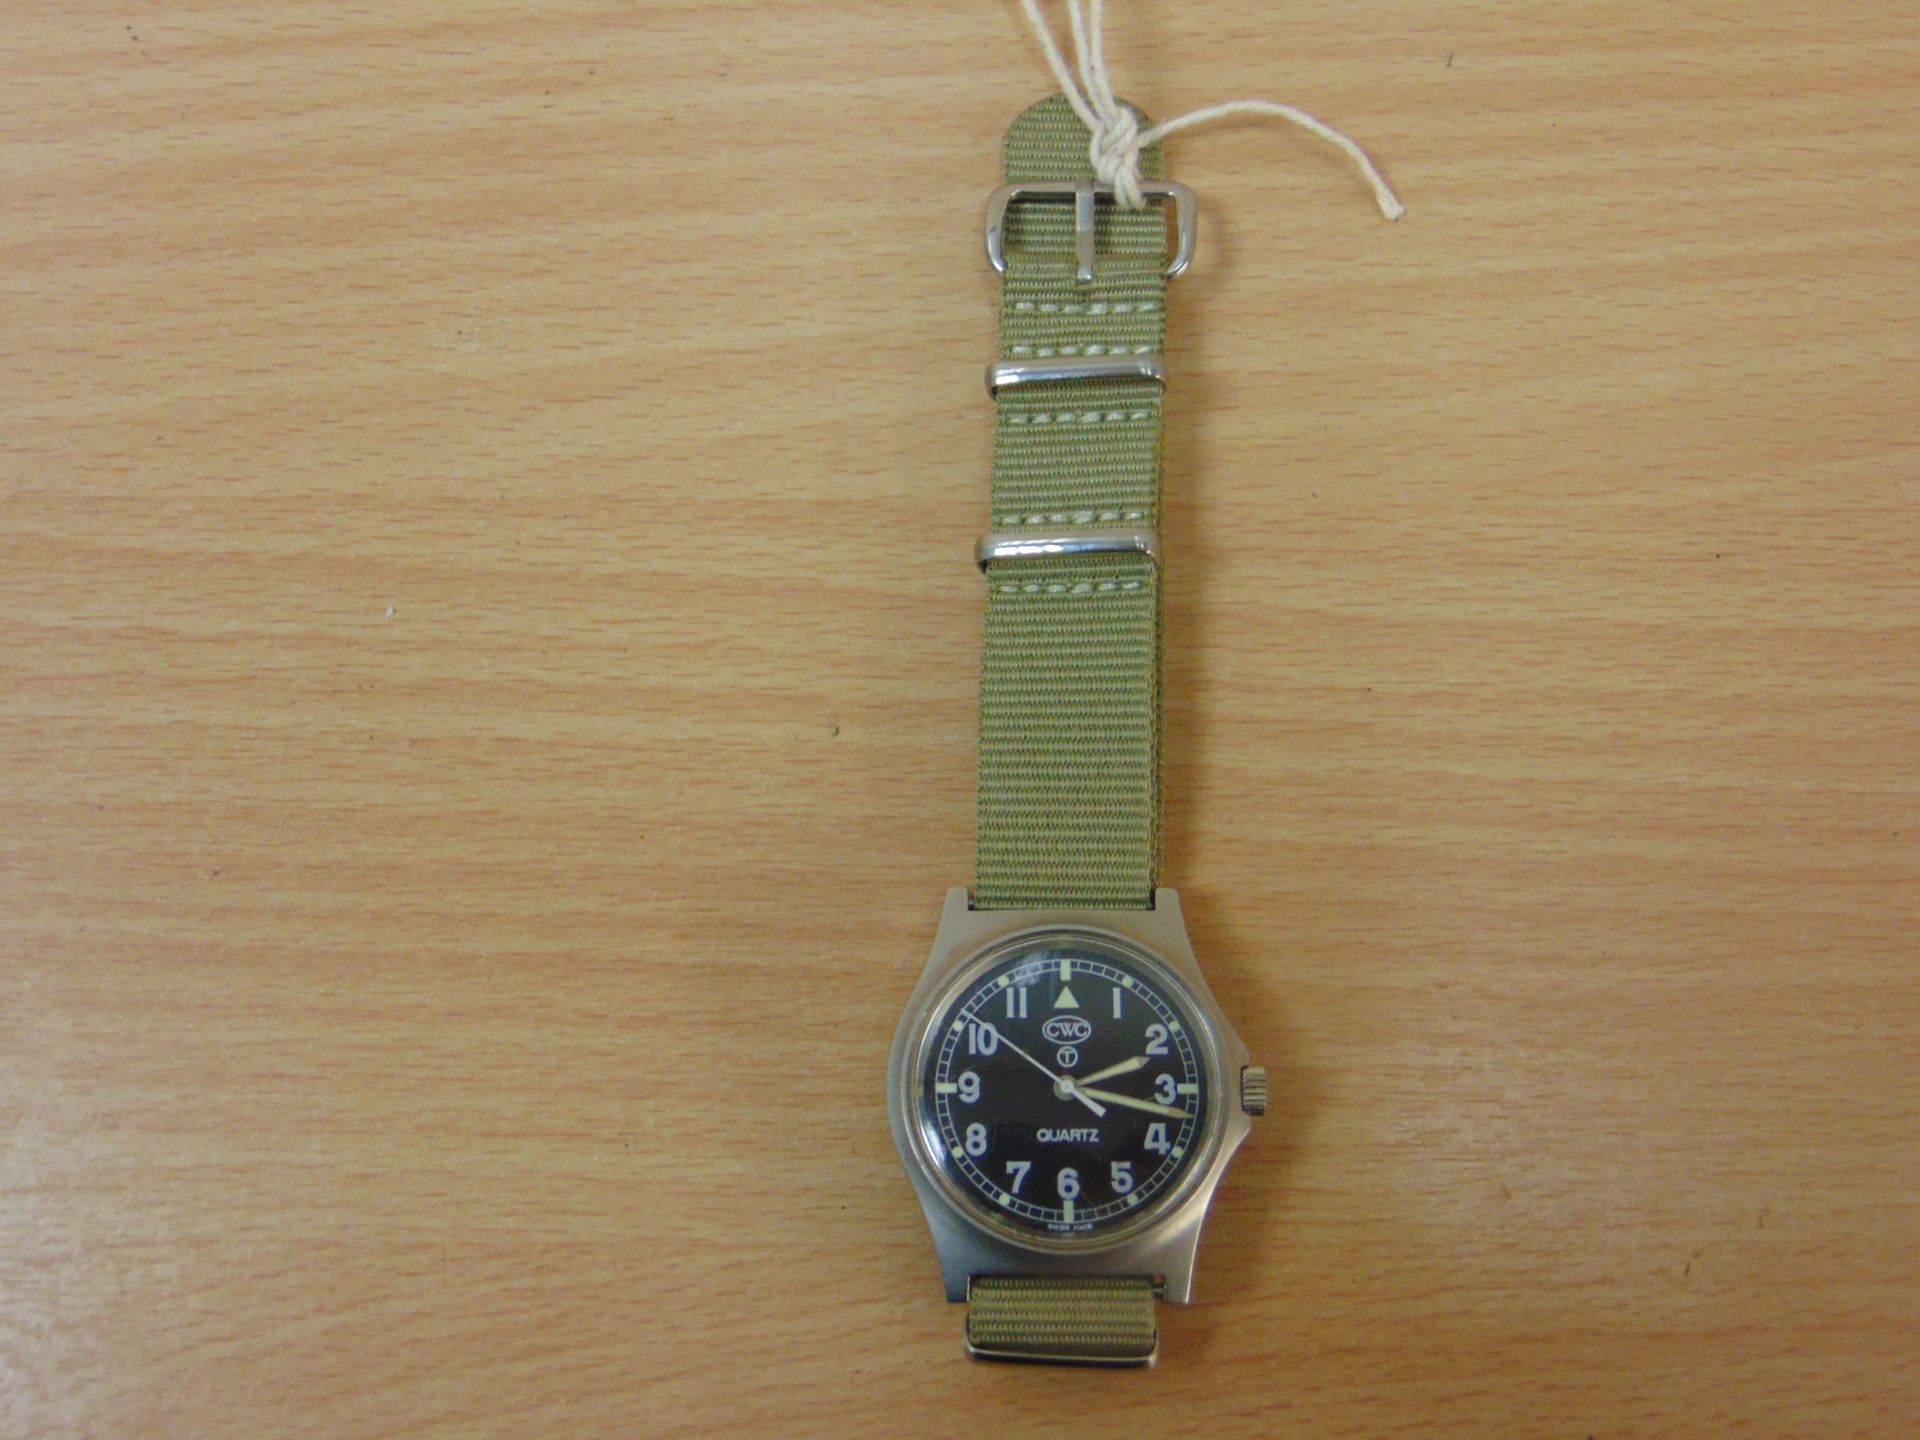 VERY RARE 0552 CWC ROYAL MARINES ISSUE SERVICE WATCH DATE 1989 (GULF WAR) - Image 6 of 9